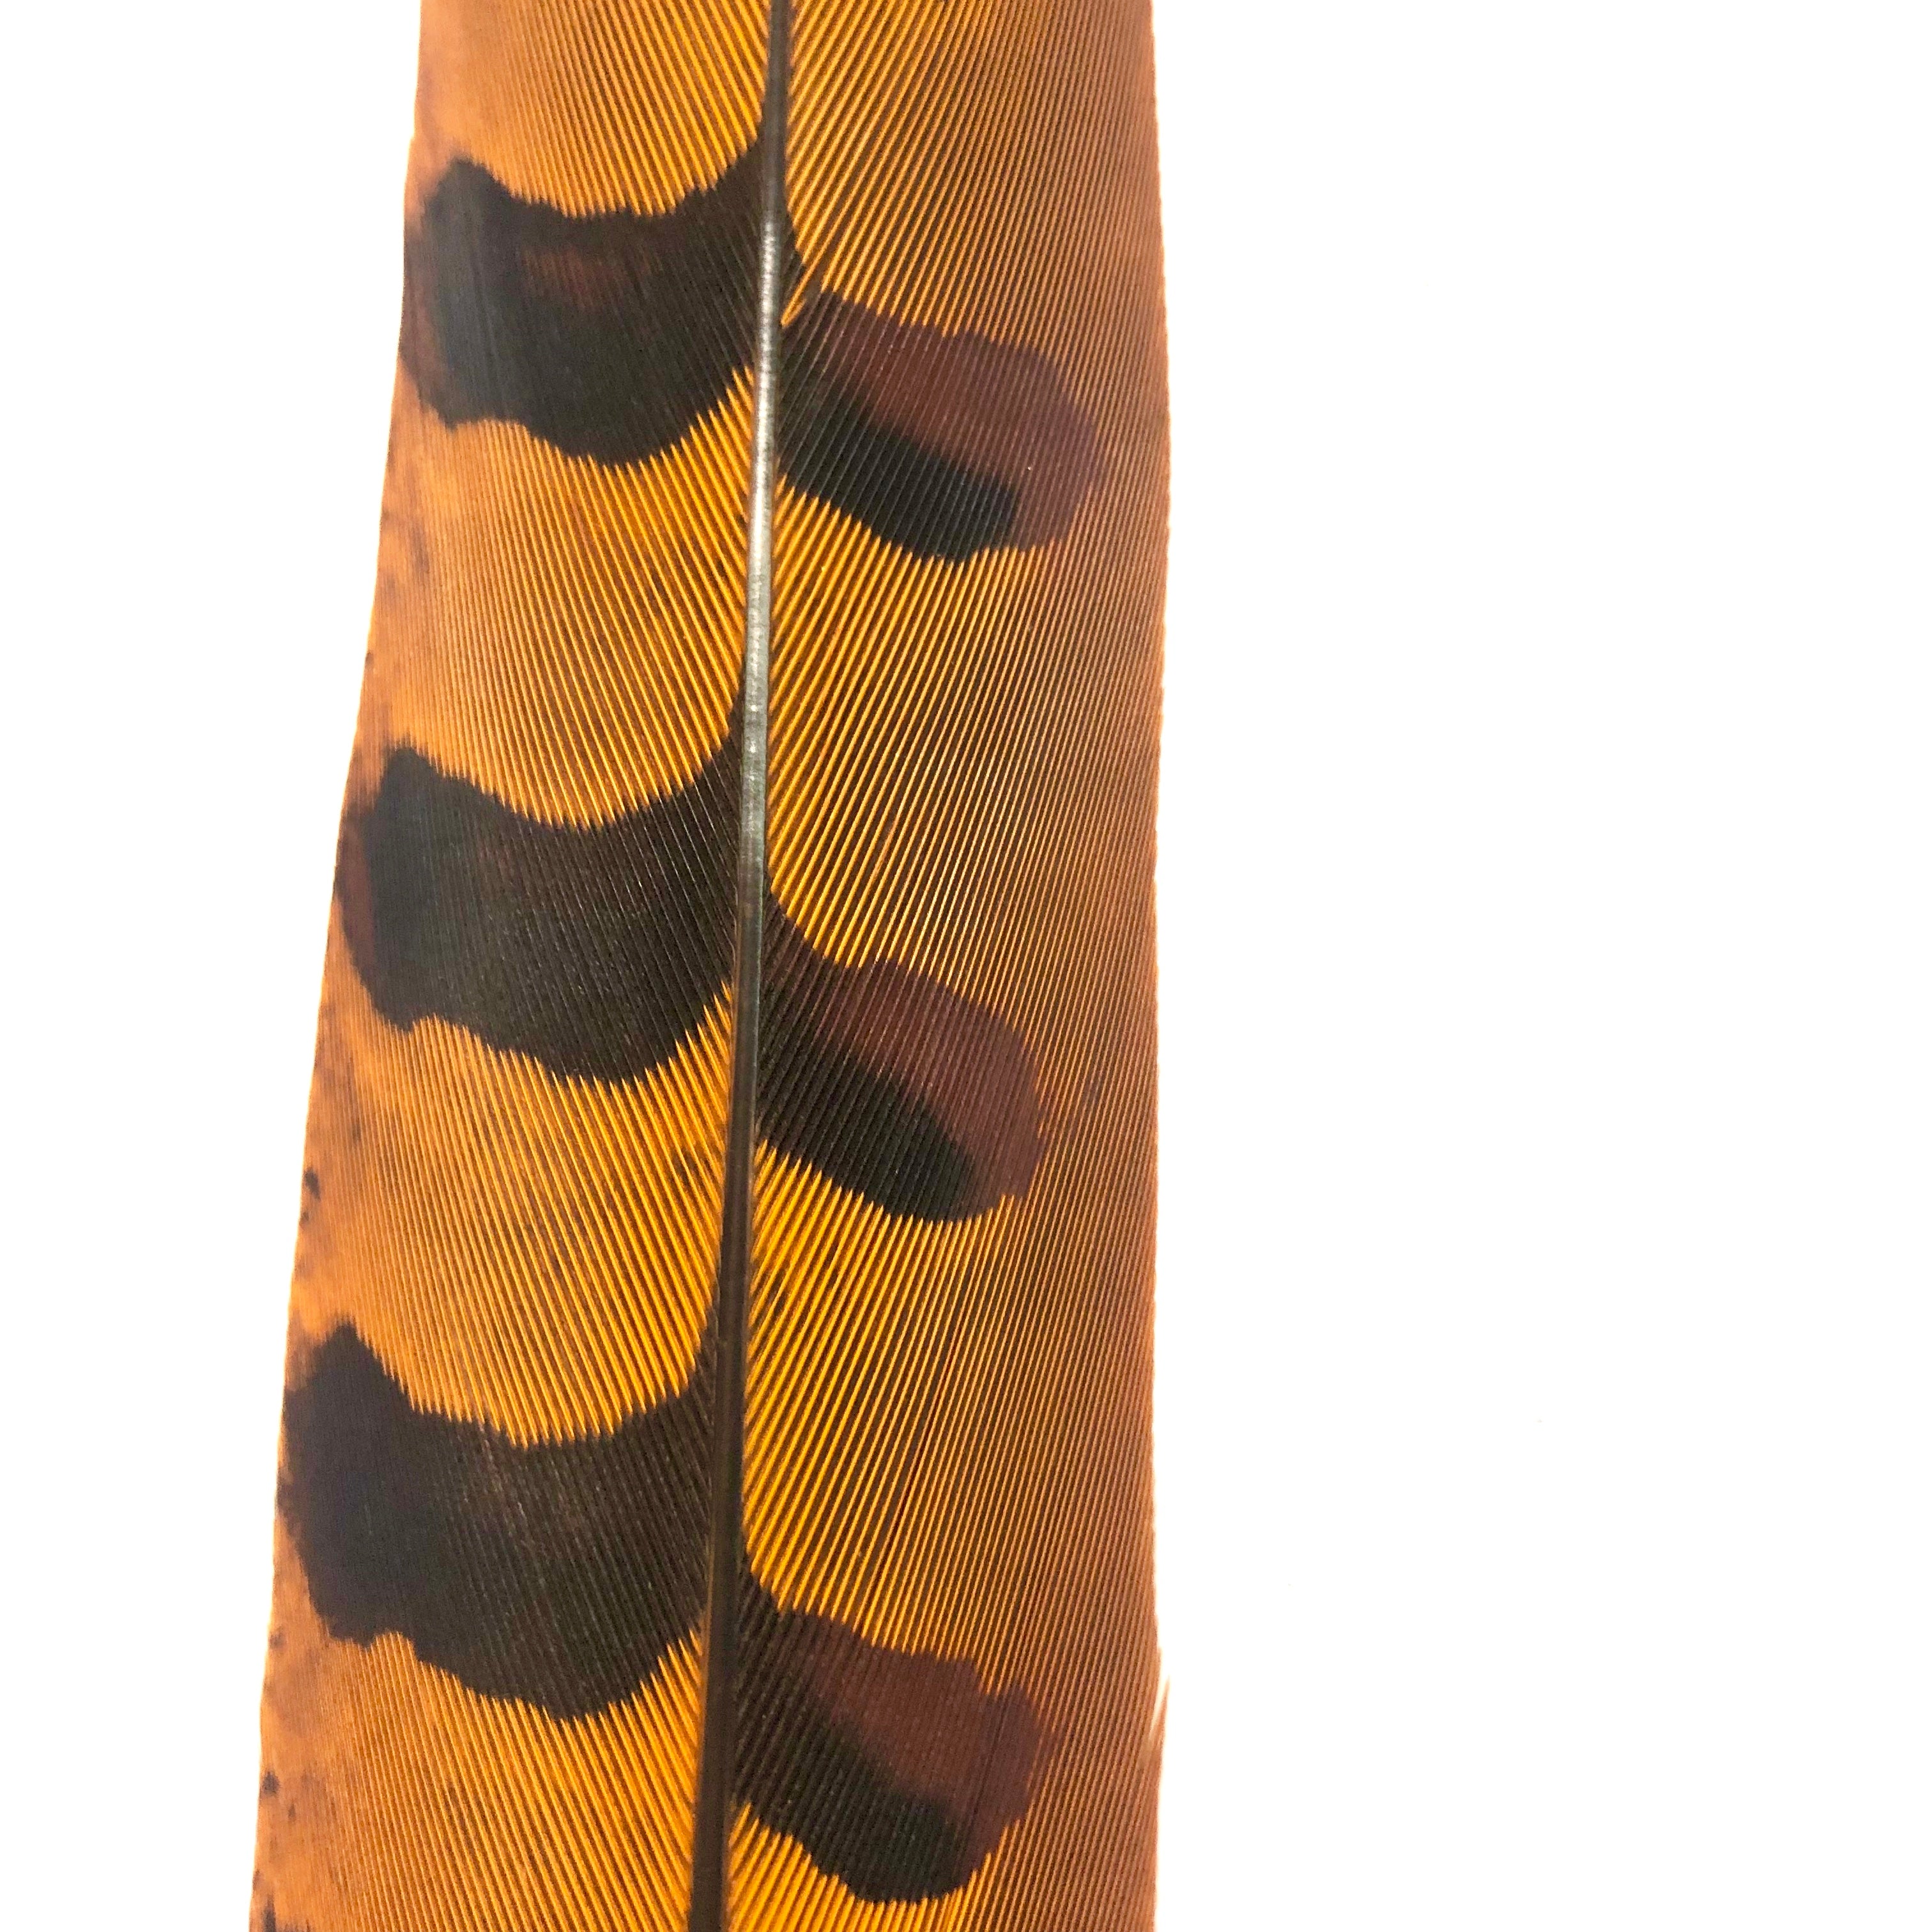 18" to 20" Reeves Pheasant Tail Feather - Orange ((SECONDS))